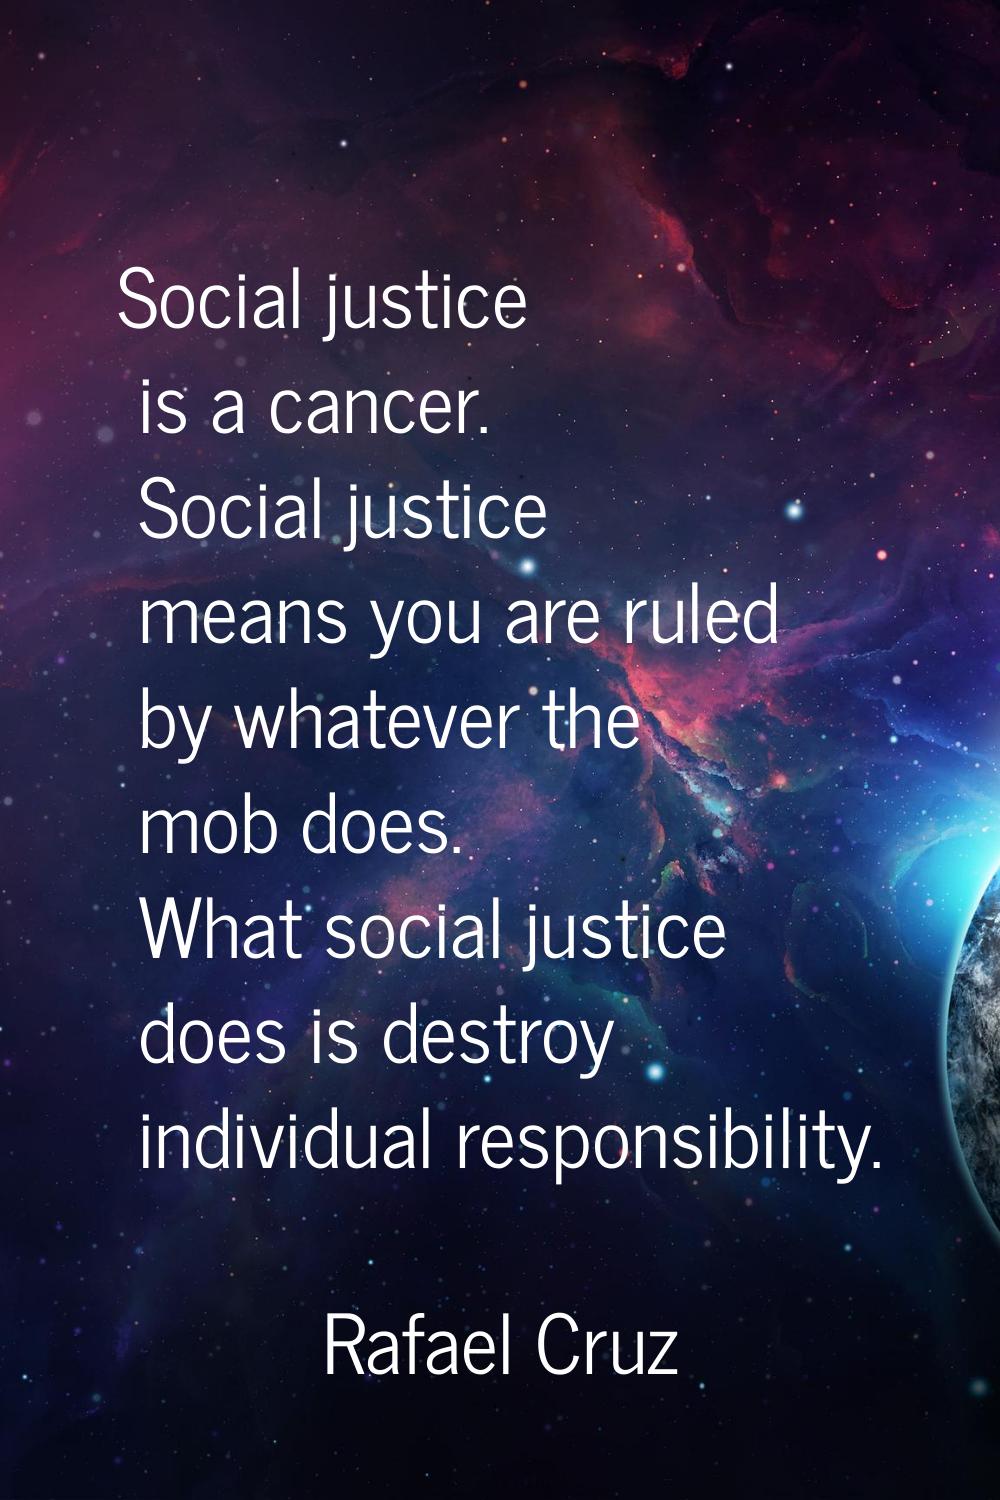 Social justice is a cancer. Social justice means you are ruled by whatever the mob does. What socia